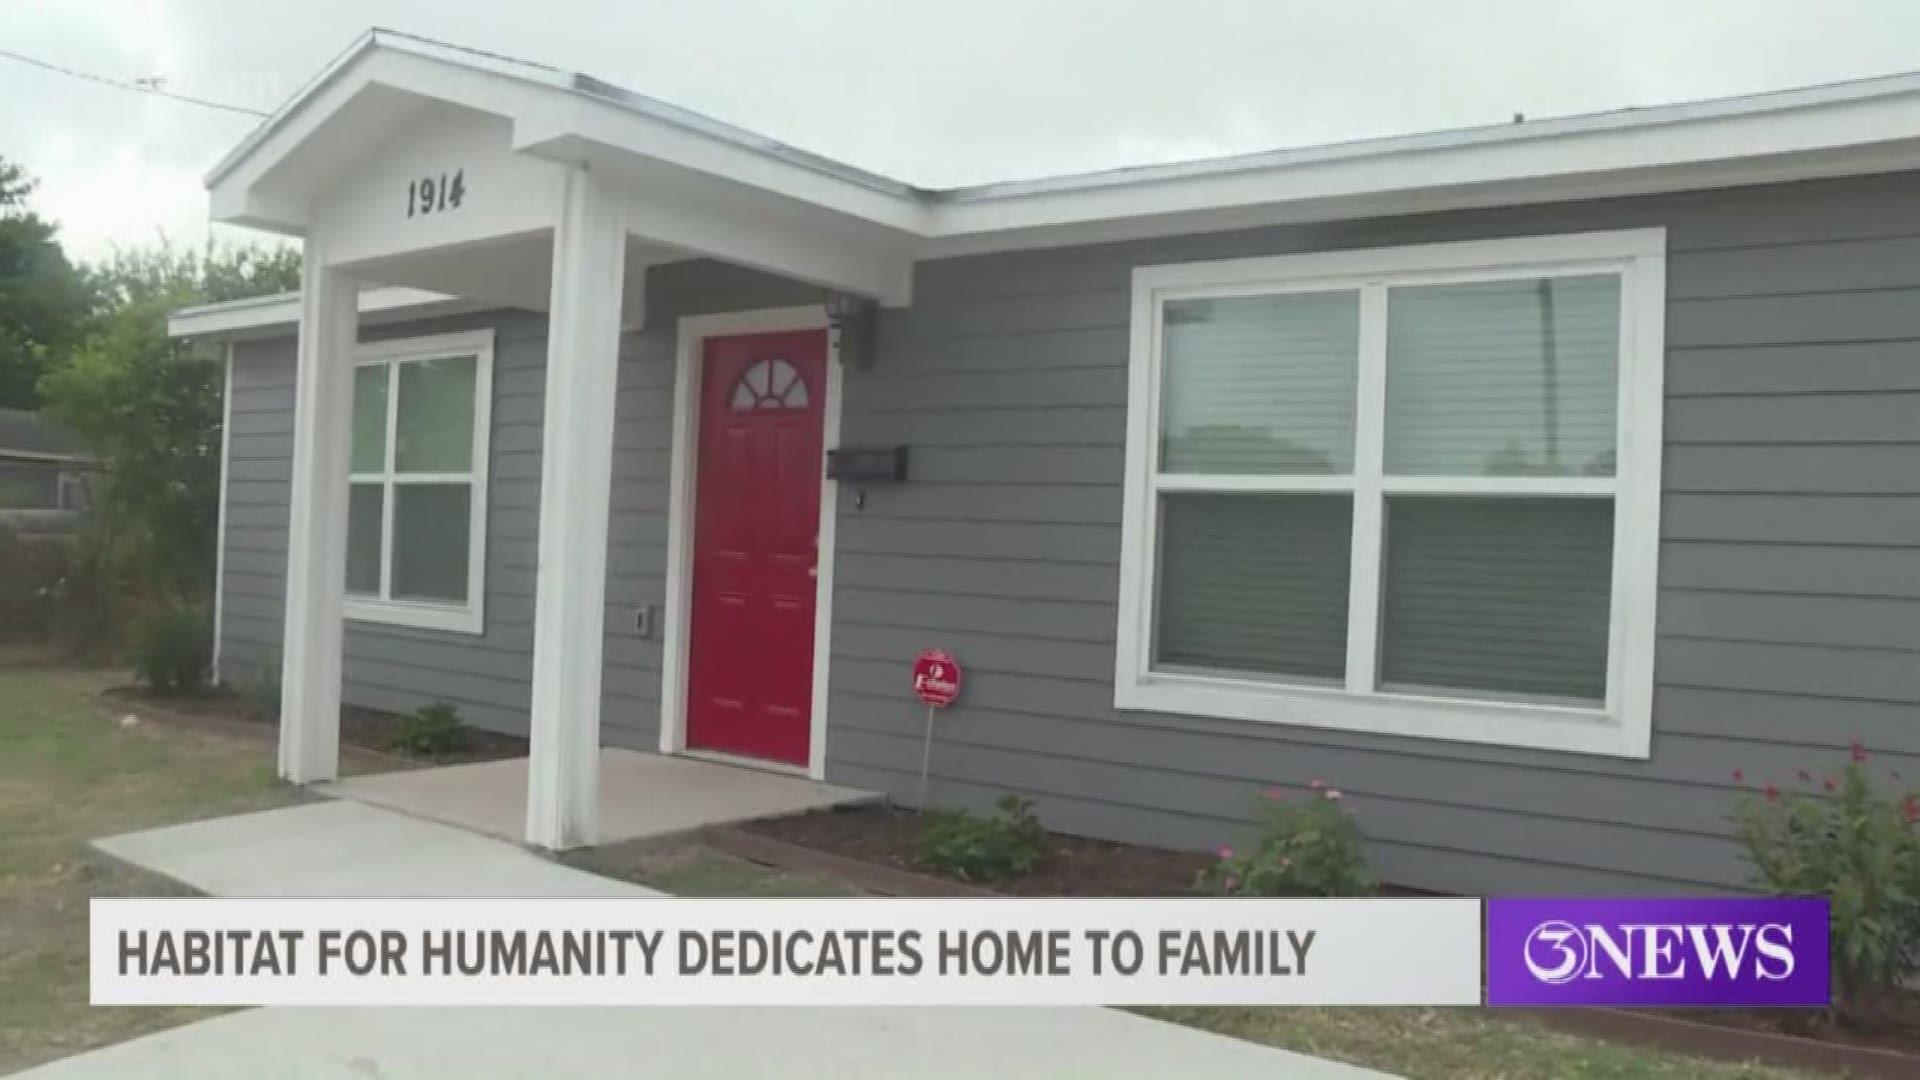 After months of hard work, Habitat for Humanity dedicated its newest home Friday to a family in Corpus Christi's northside.